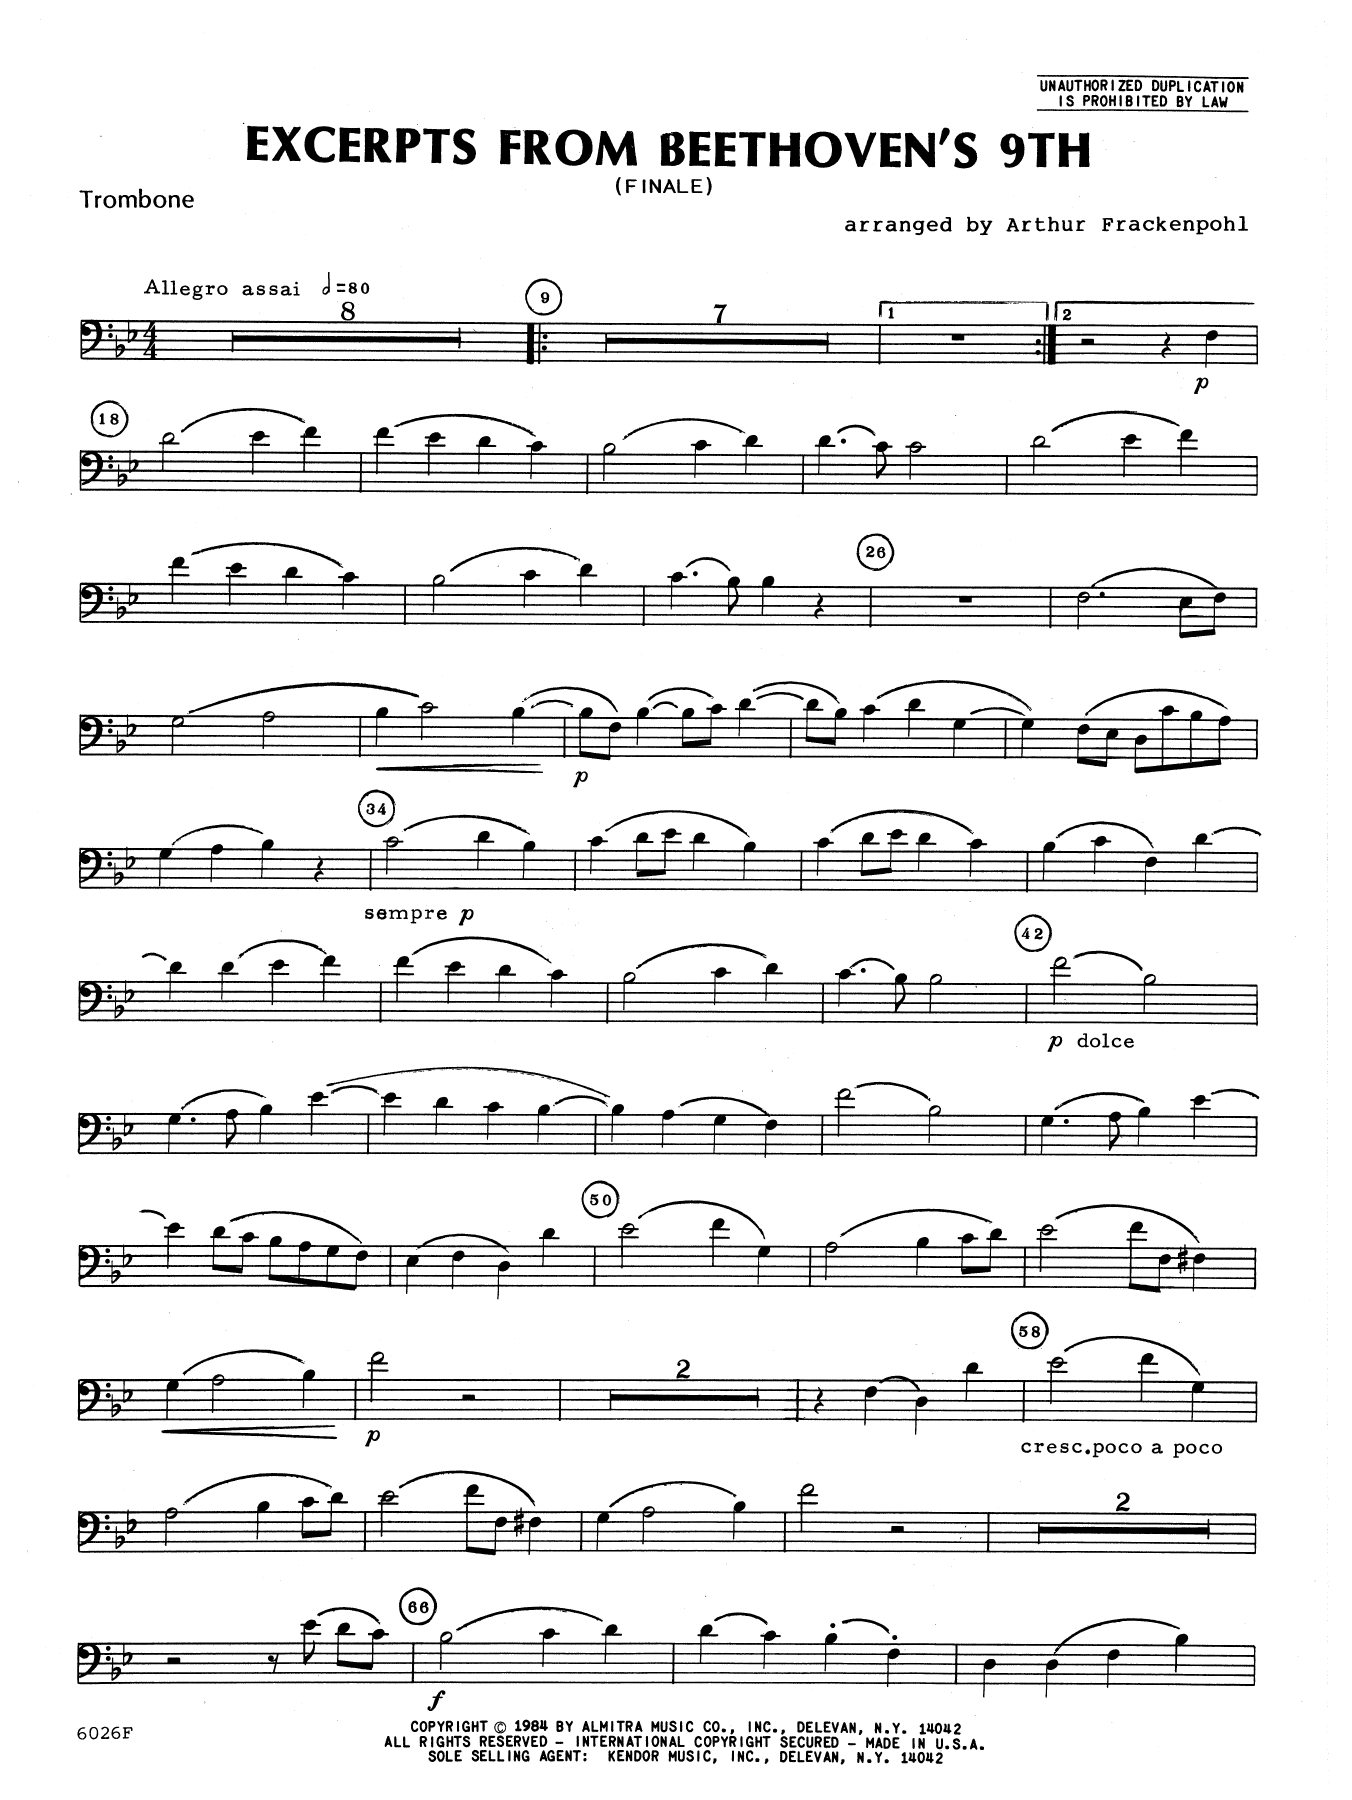 Download Arthur Frackenpohl Excerpts From Beethoven's 9th - Trombon Sheet Music